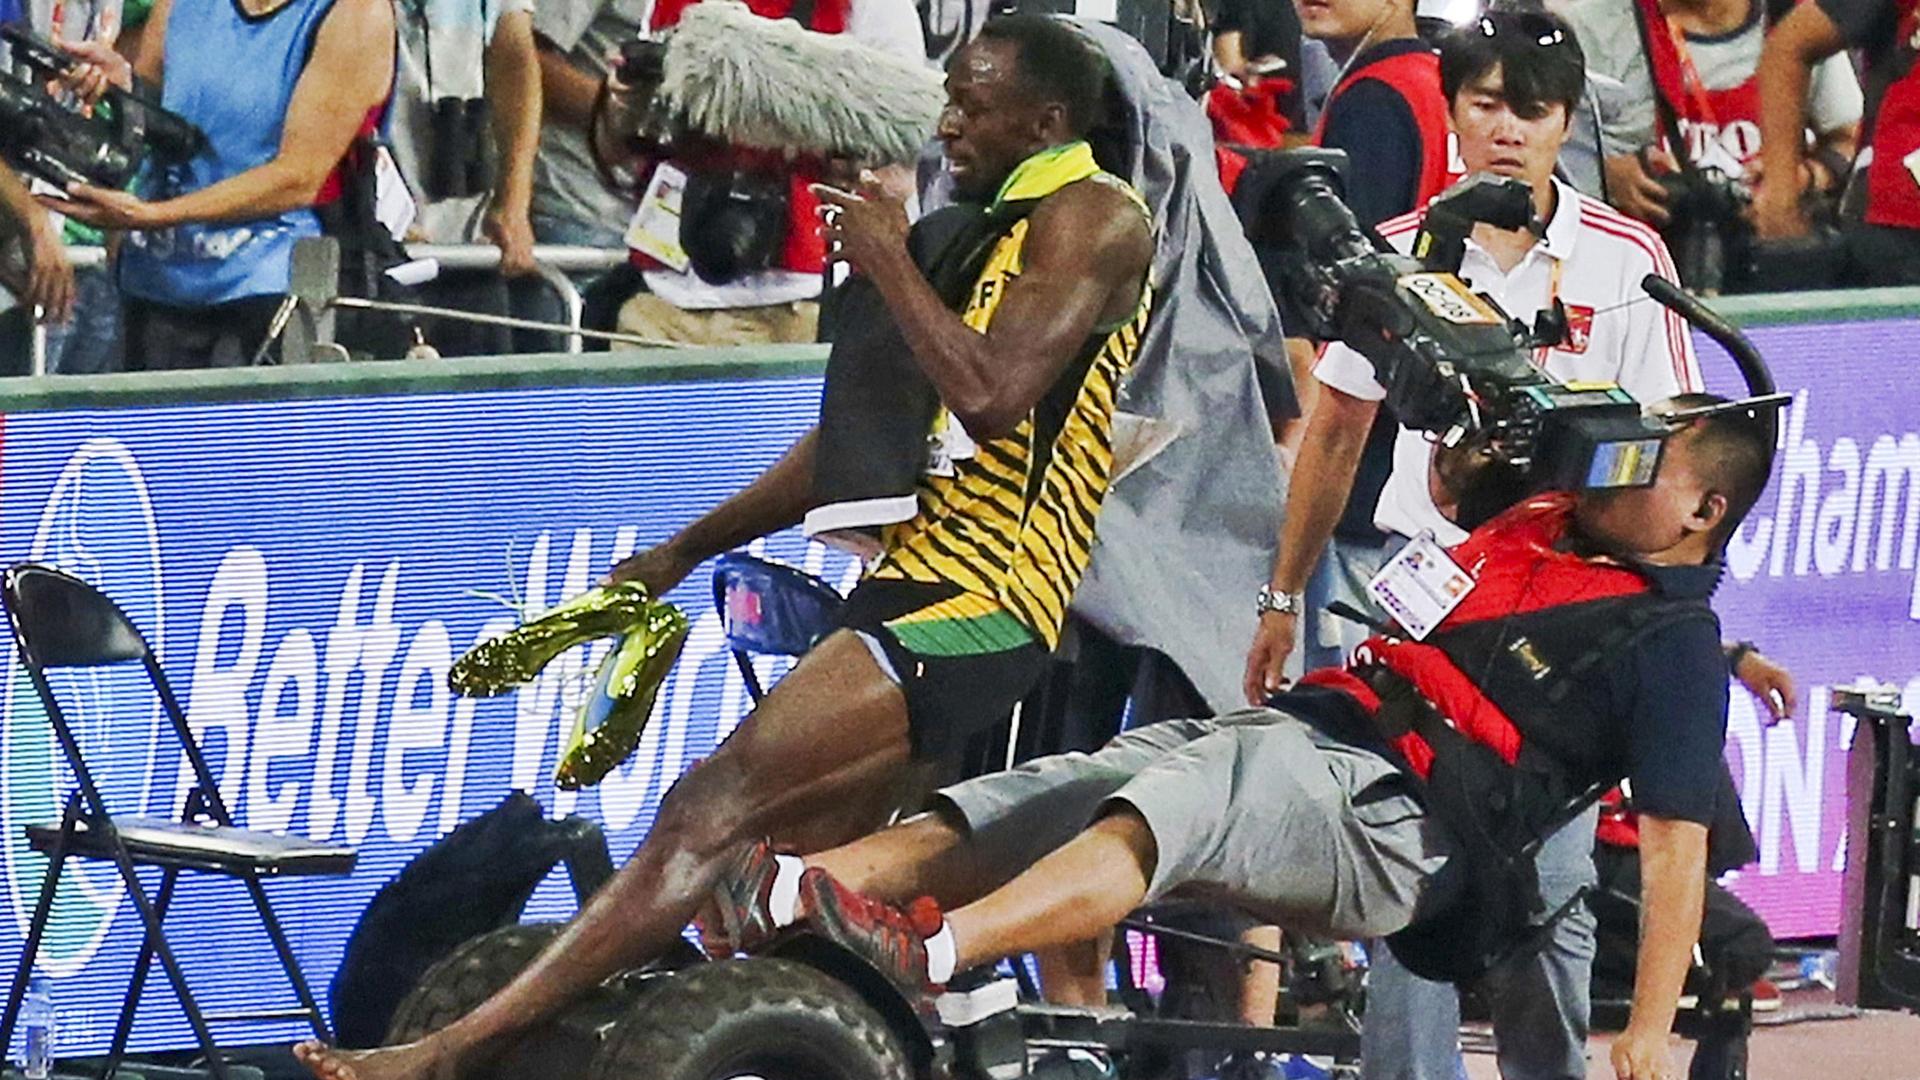 Usain Bolt is hit by a cameraman on a Segway as he celebrates after winning the men's 200 metres final at the 15th IAAF World Championships at the National Stadium in Beijing, China, August 27, 2015.